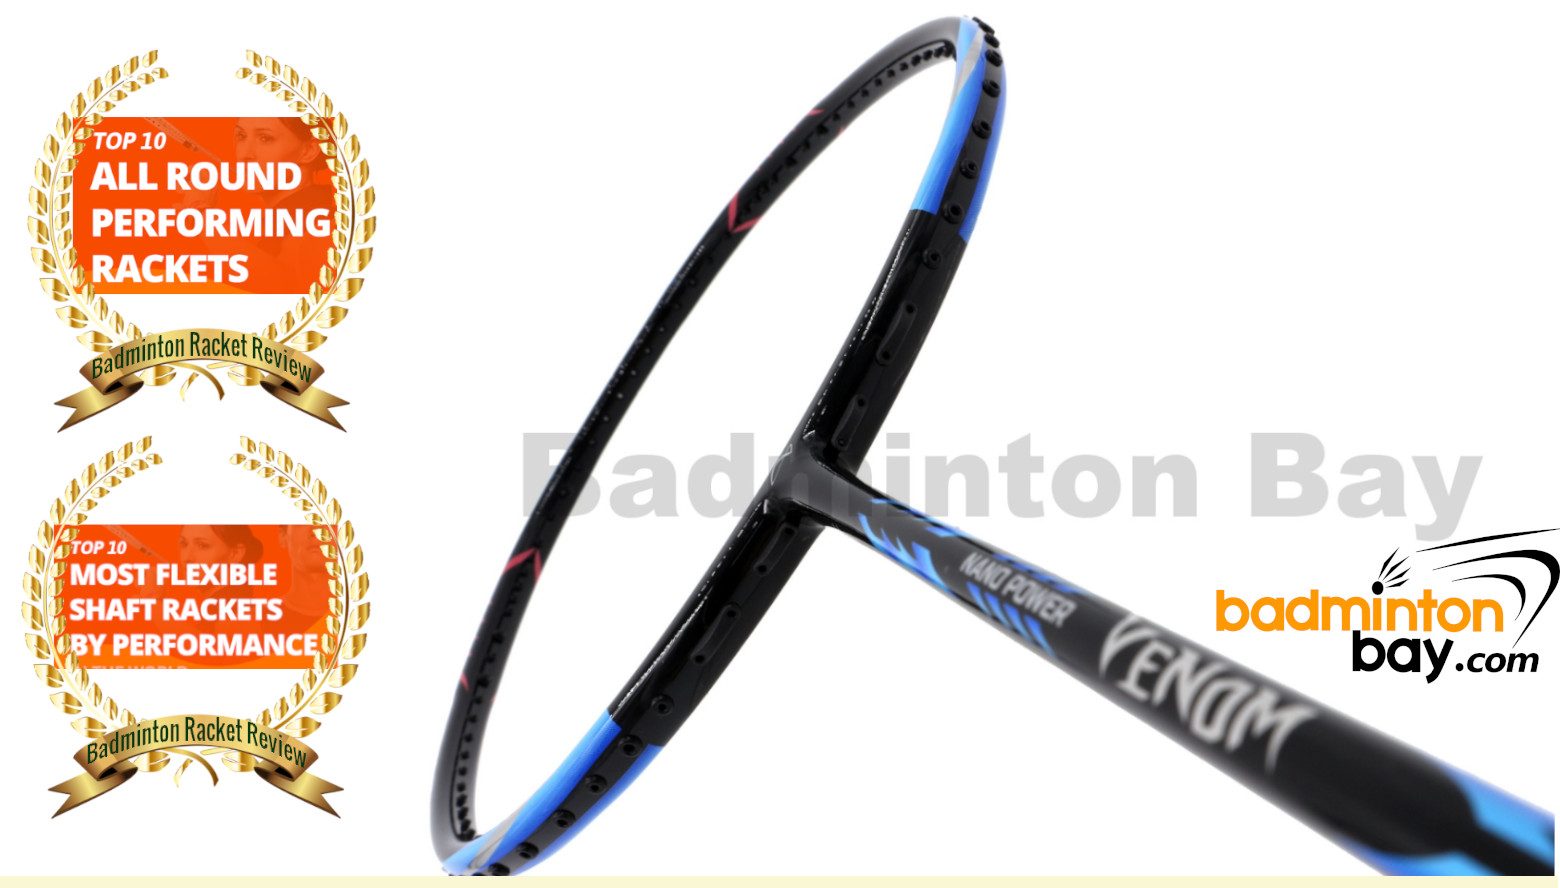 Review on Abroz Nano Power VENOM, The Unique, Light and Fast Racket With High Performance That Every Badminton Players Been Looking For.